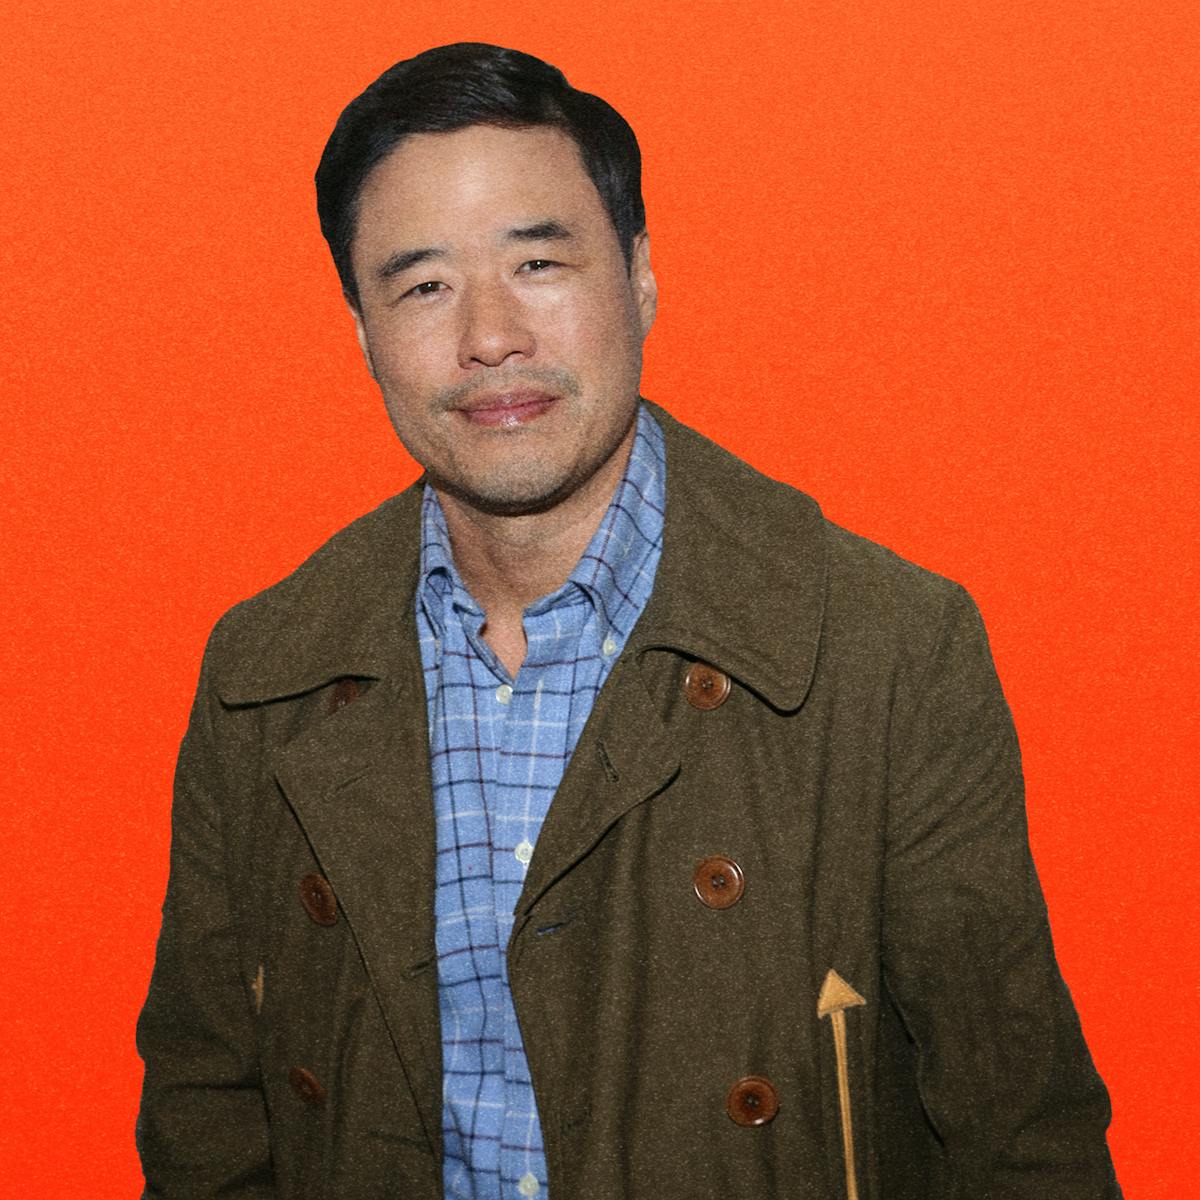 Randall Park wears a green peacoat over a blue checkered shirt. He smiles slightly against an orange background with his name written in all capital letters.